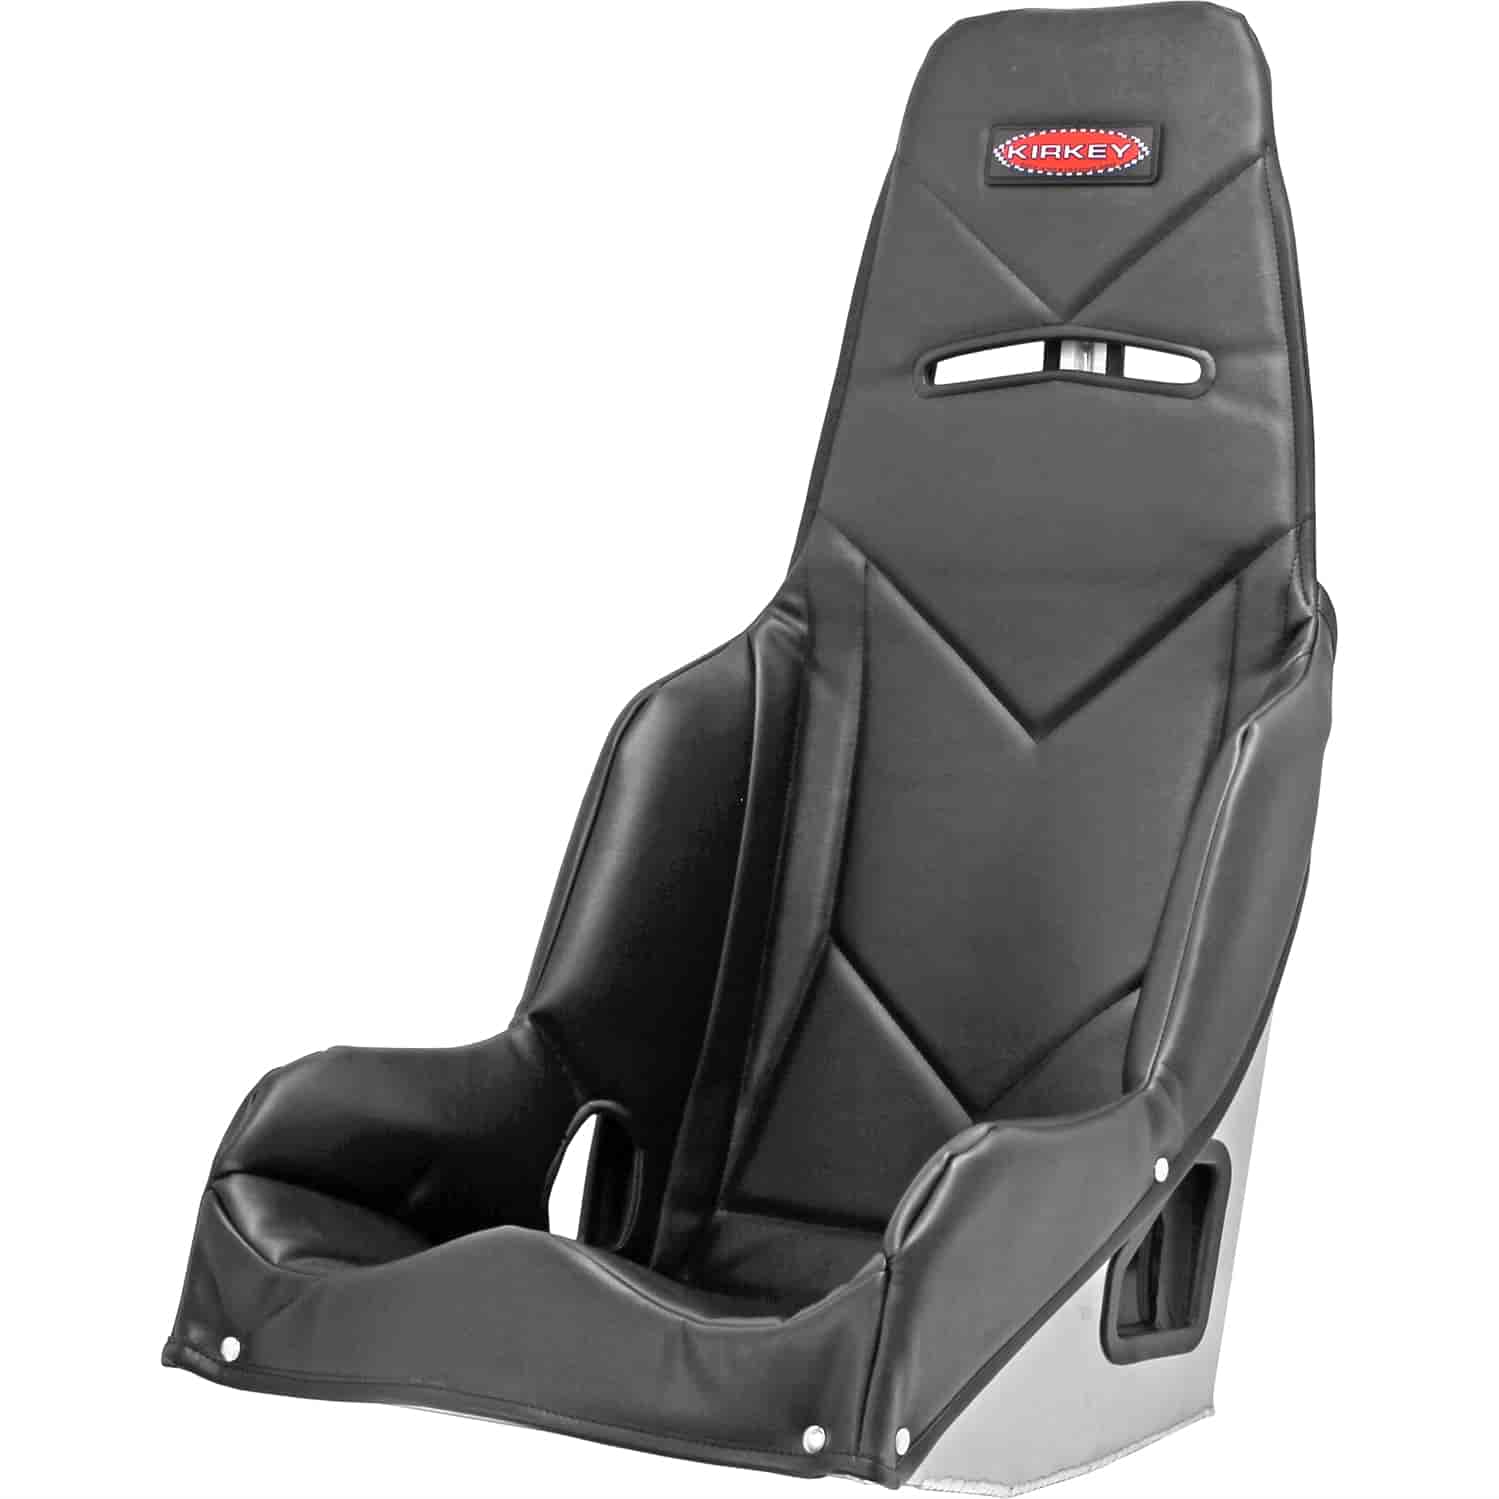 55 Series Pro Street Drag Seat Cover 20" Hip Width